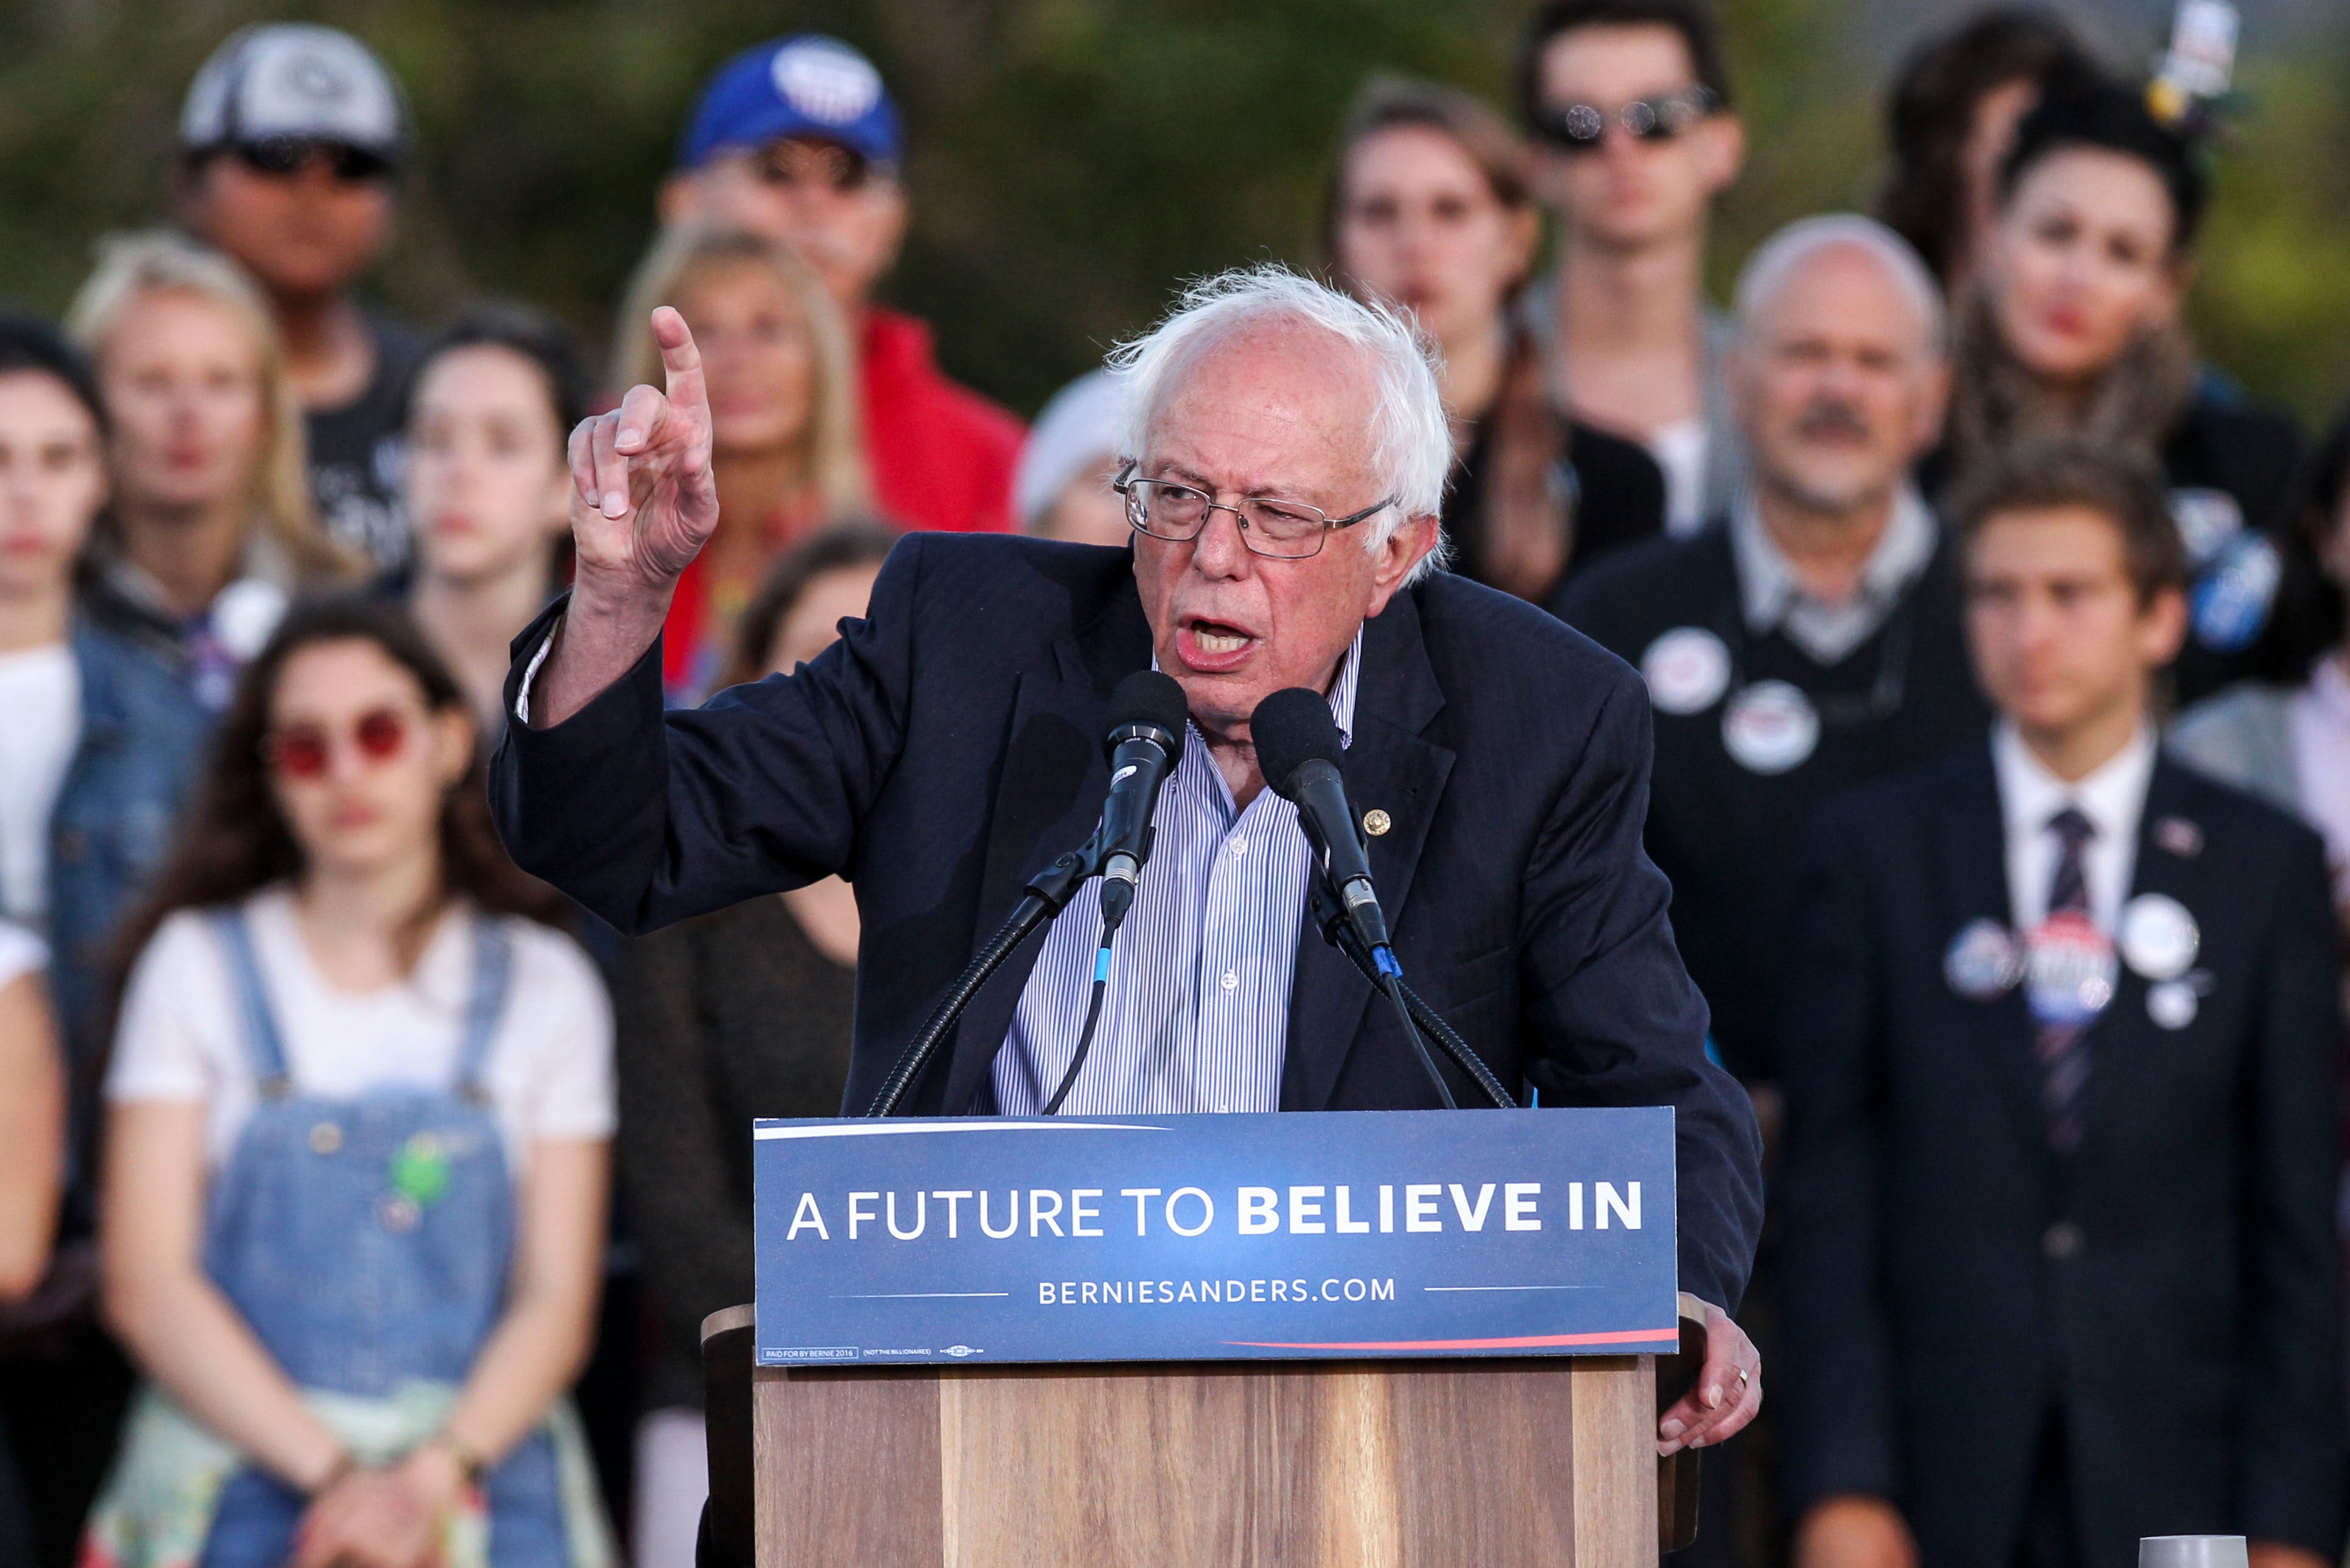 What's Next For Bernie Sanders?
